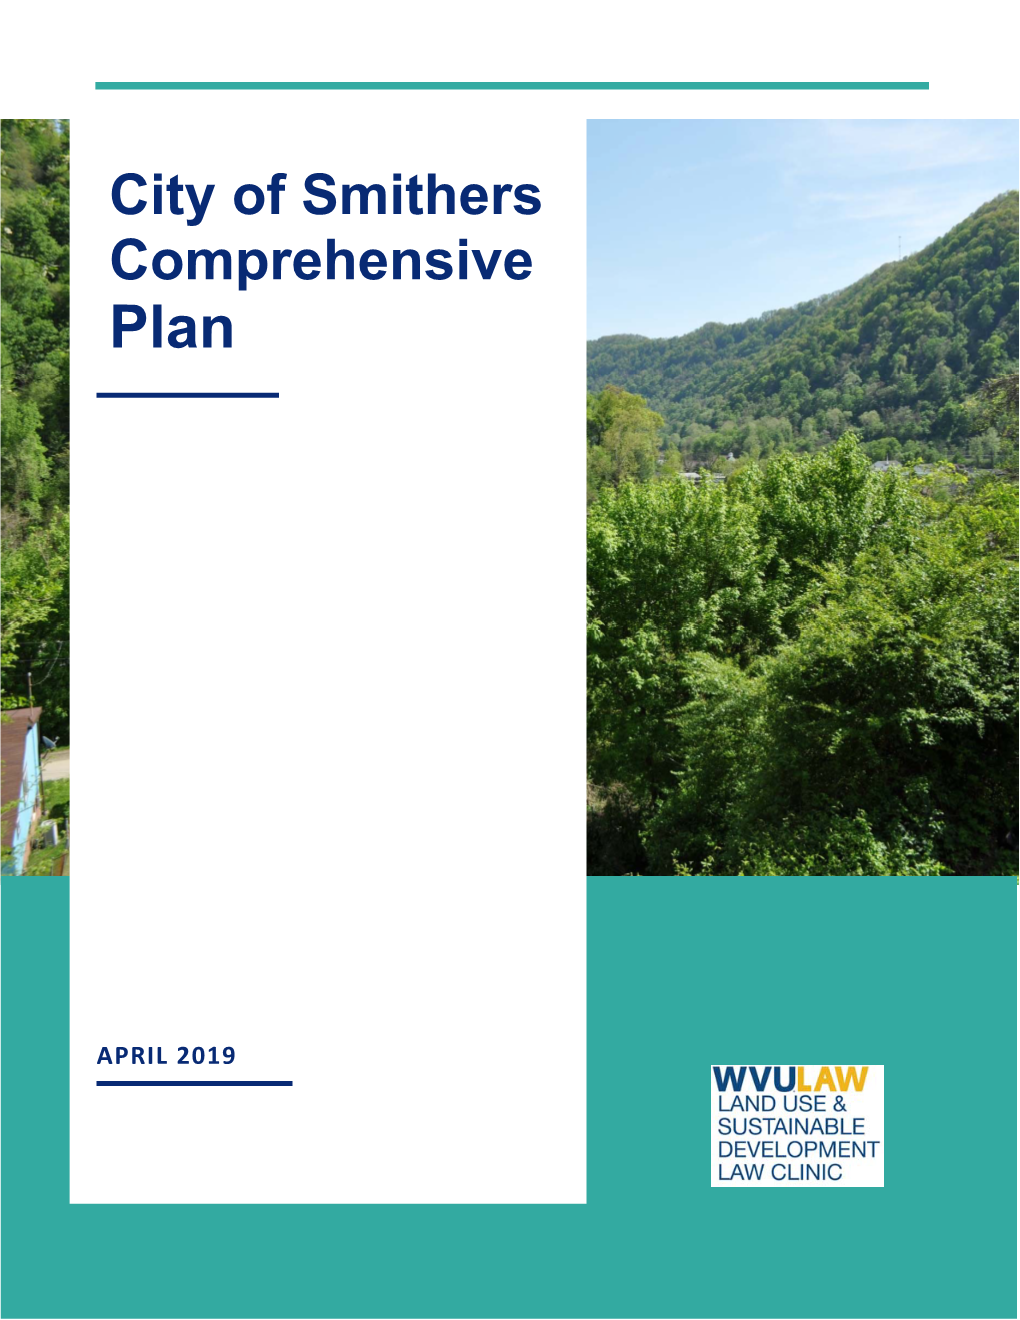 City of Smithers Comprehensive Plan